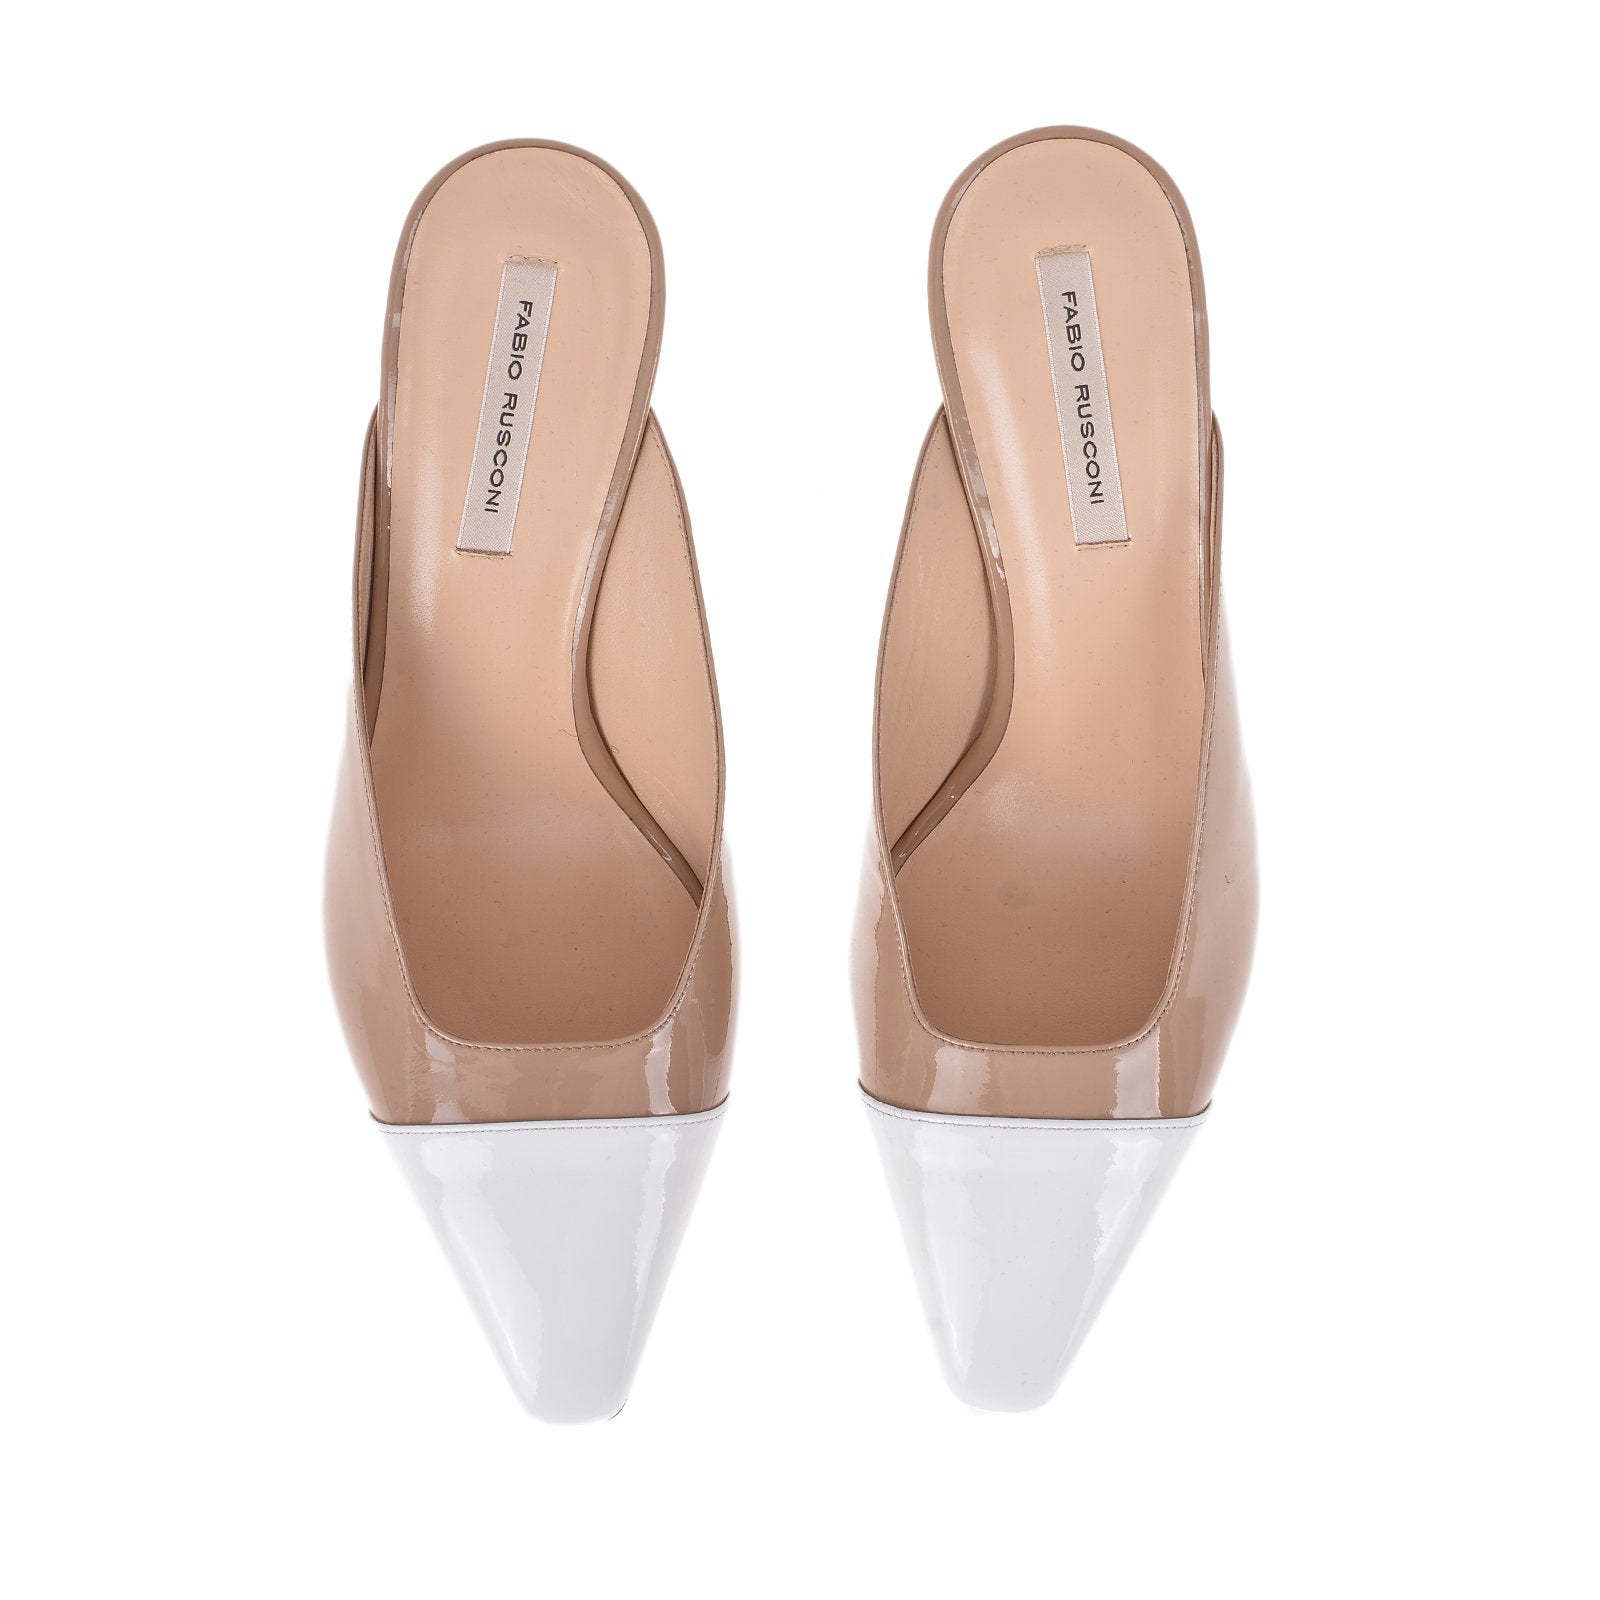 Ceppo Nude White Patent Mules Heels PATENT NUDE 2570 - 3